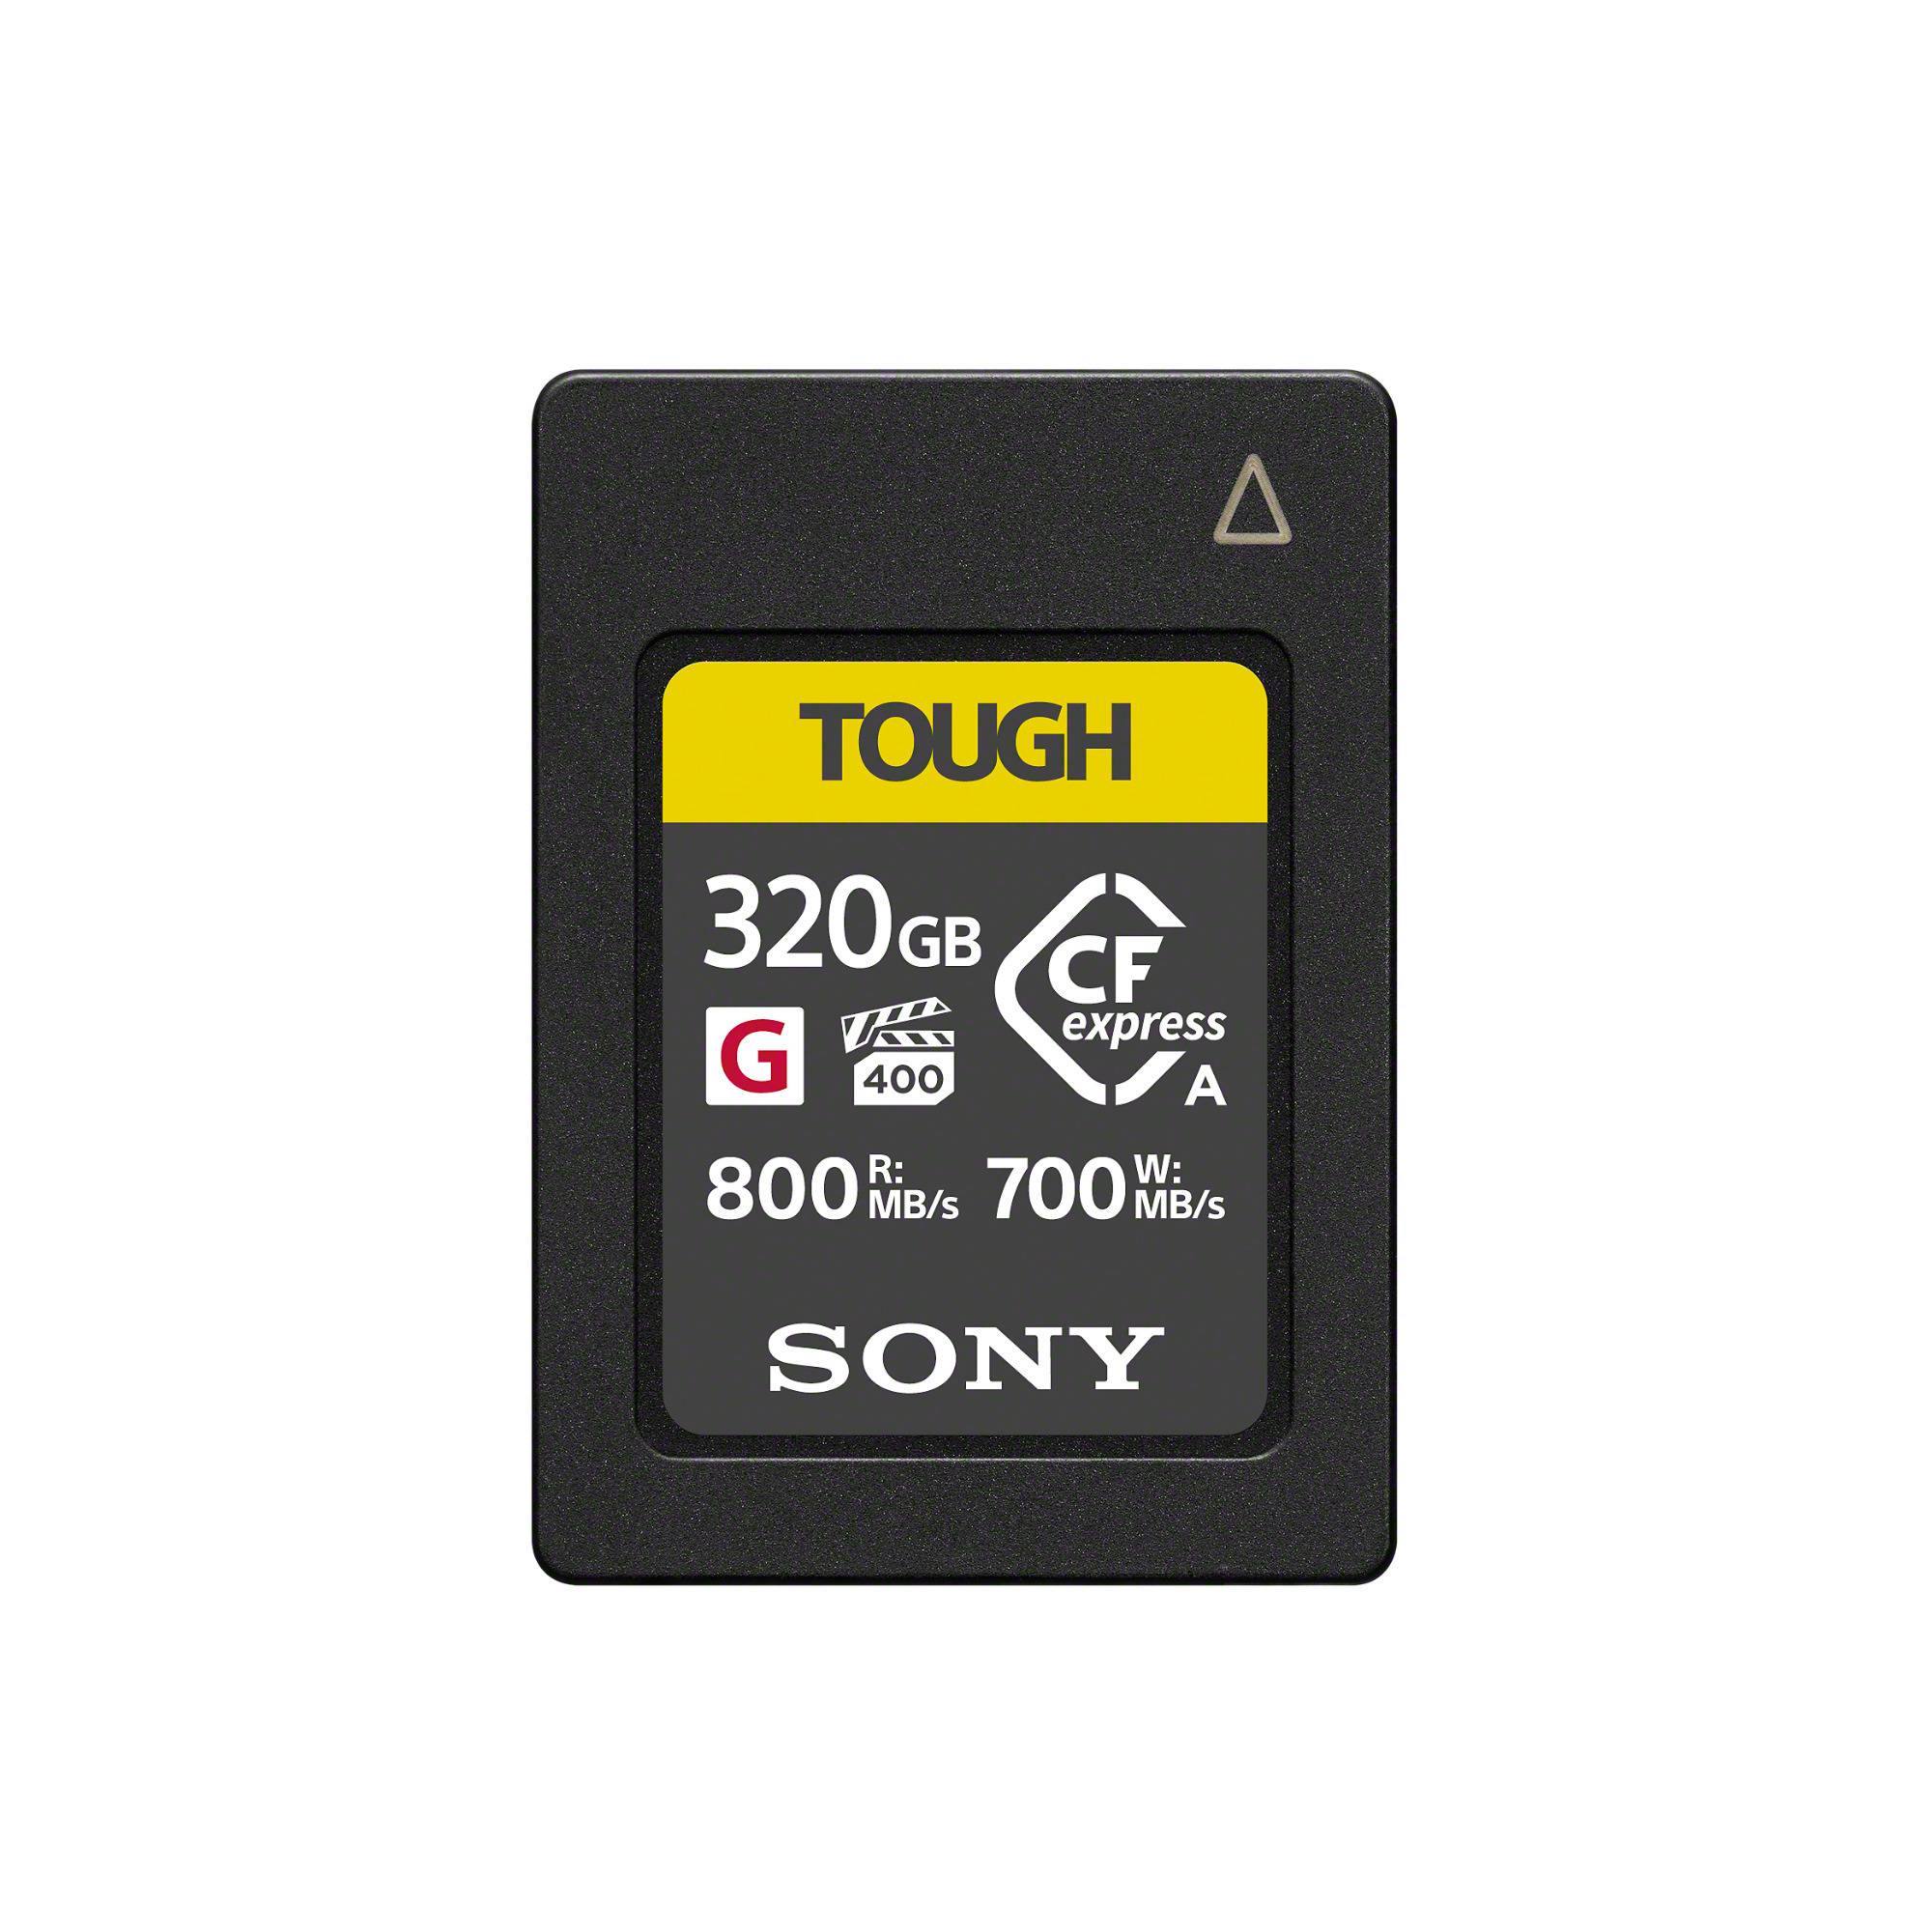 Sony CFexpress Type A 320GB Memory Card with 800MB/s Read and 700MB/s Write speed